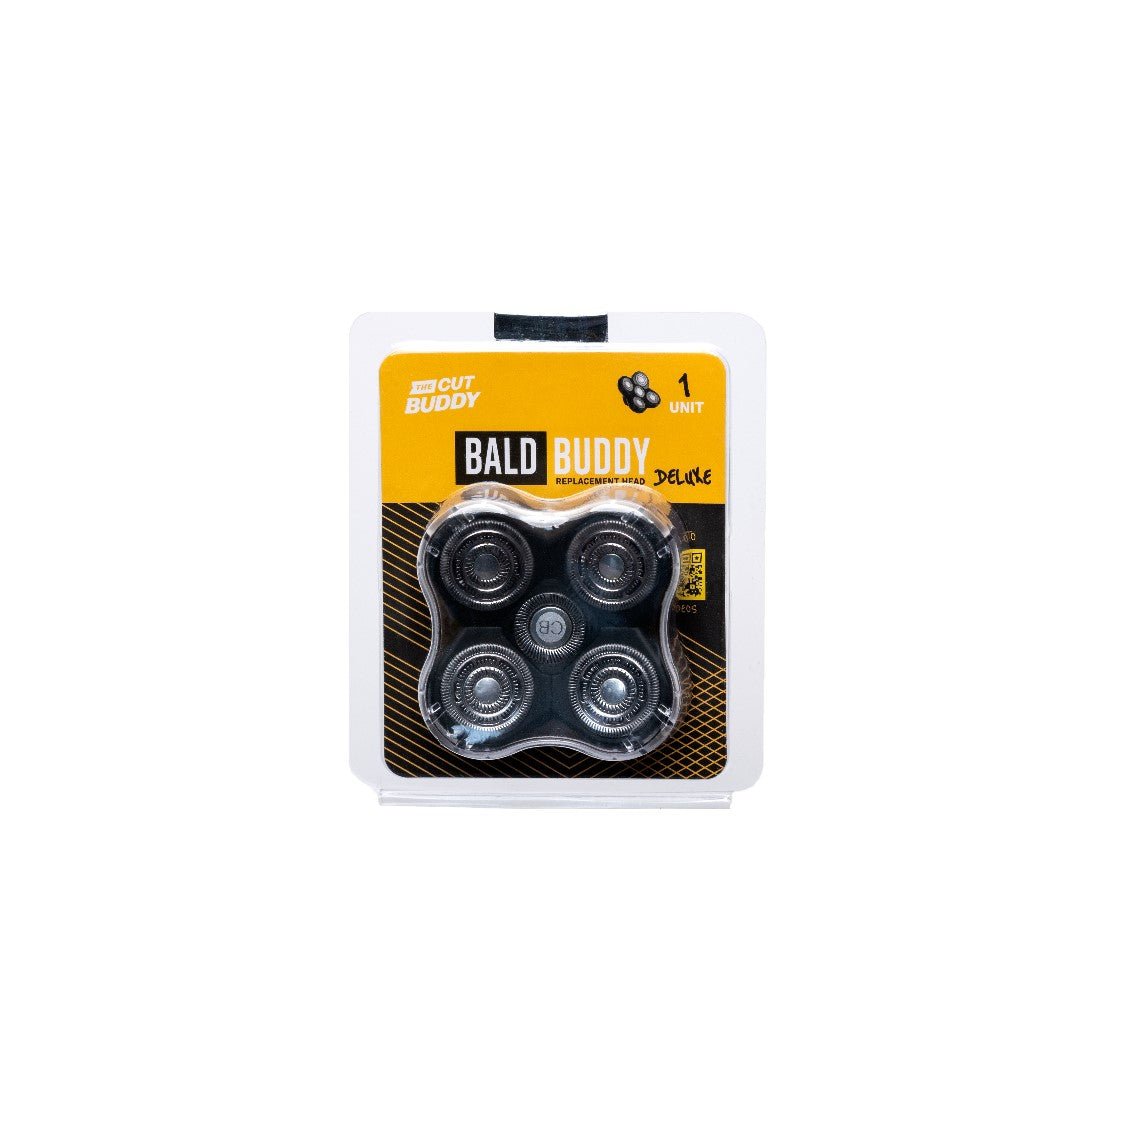 Bald Buddy - Deluxe Replacement Shaving Head (1 Unit) - The Cut Buddy-The Cut Buddy